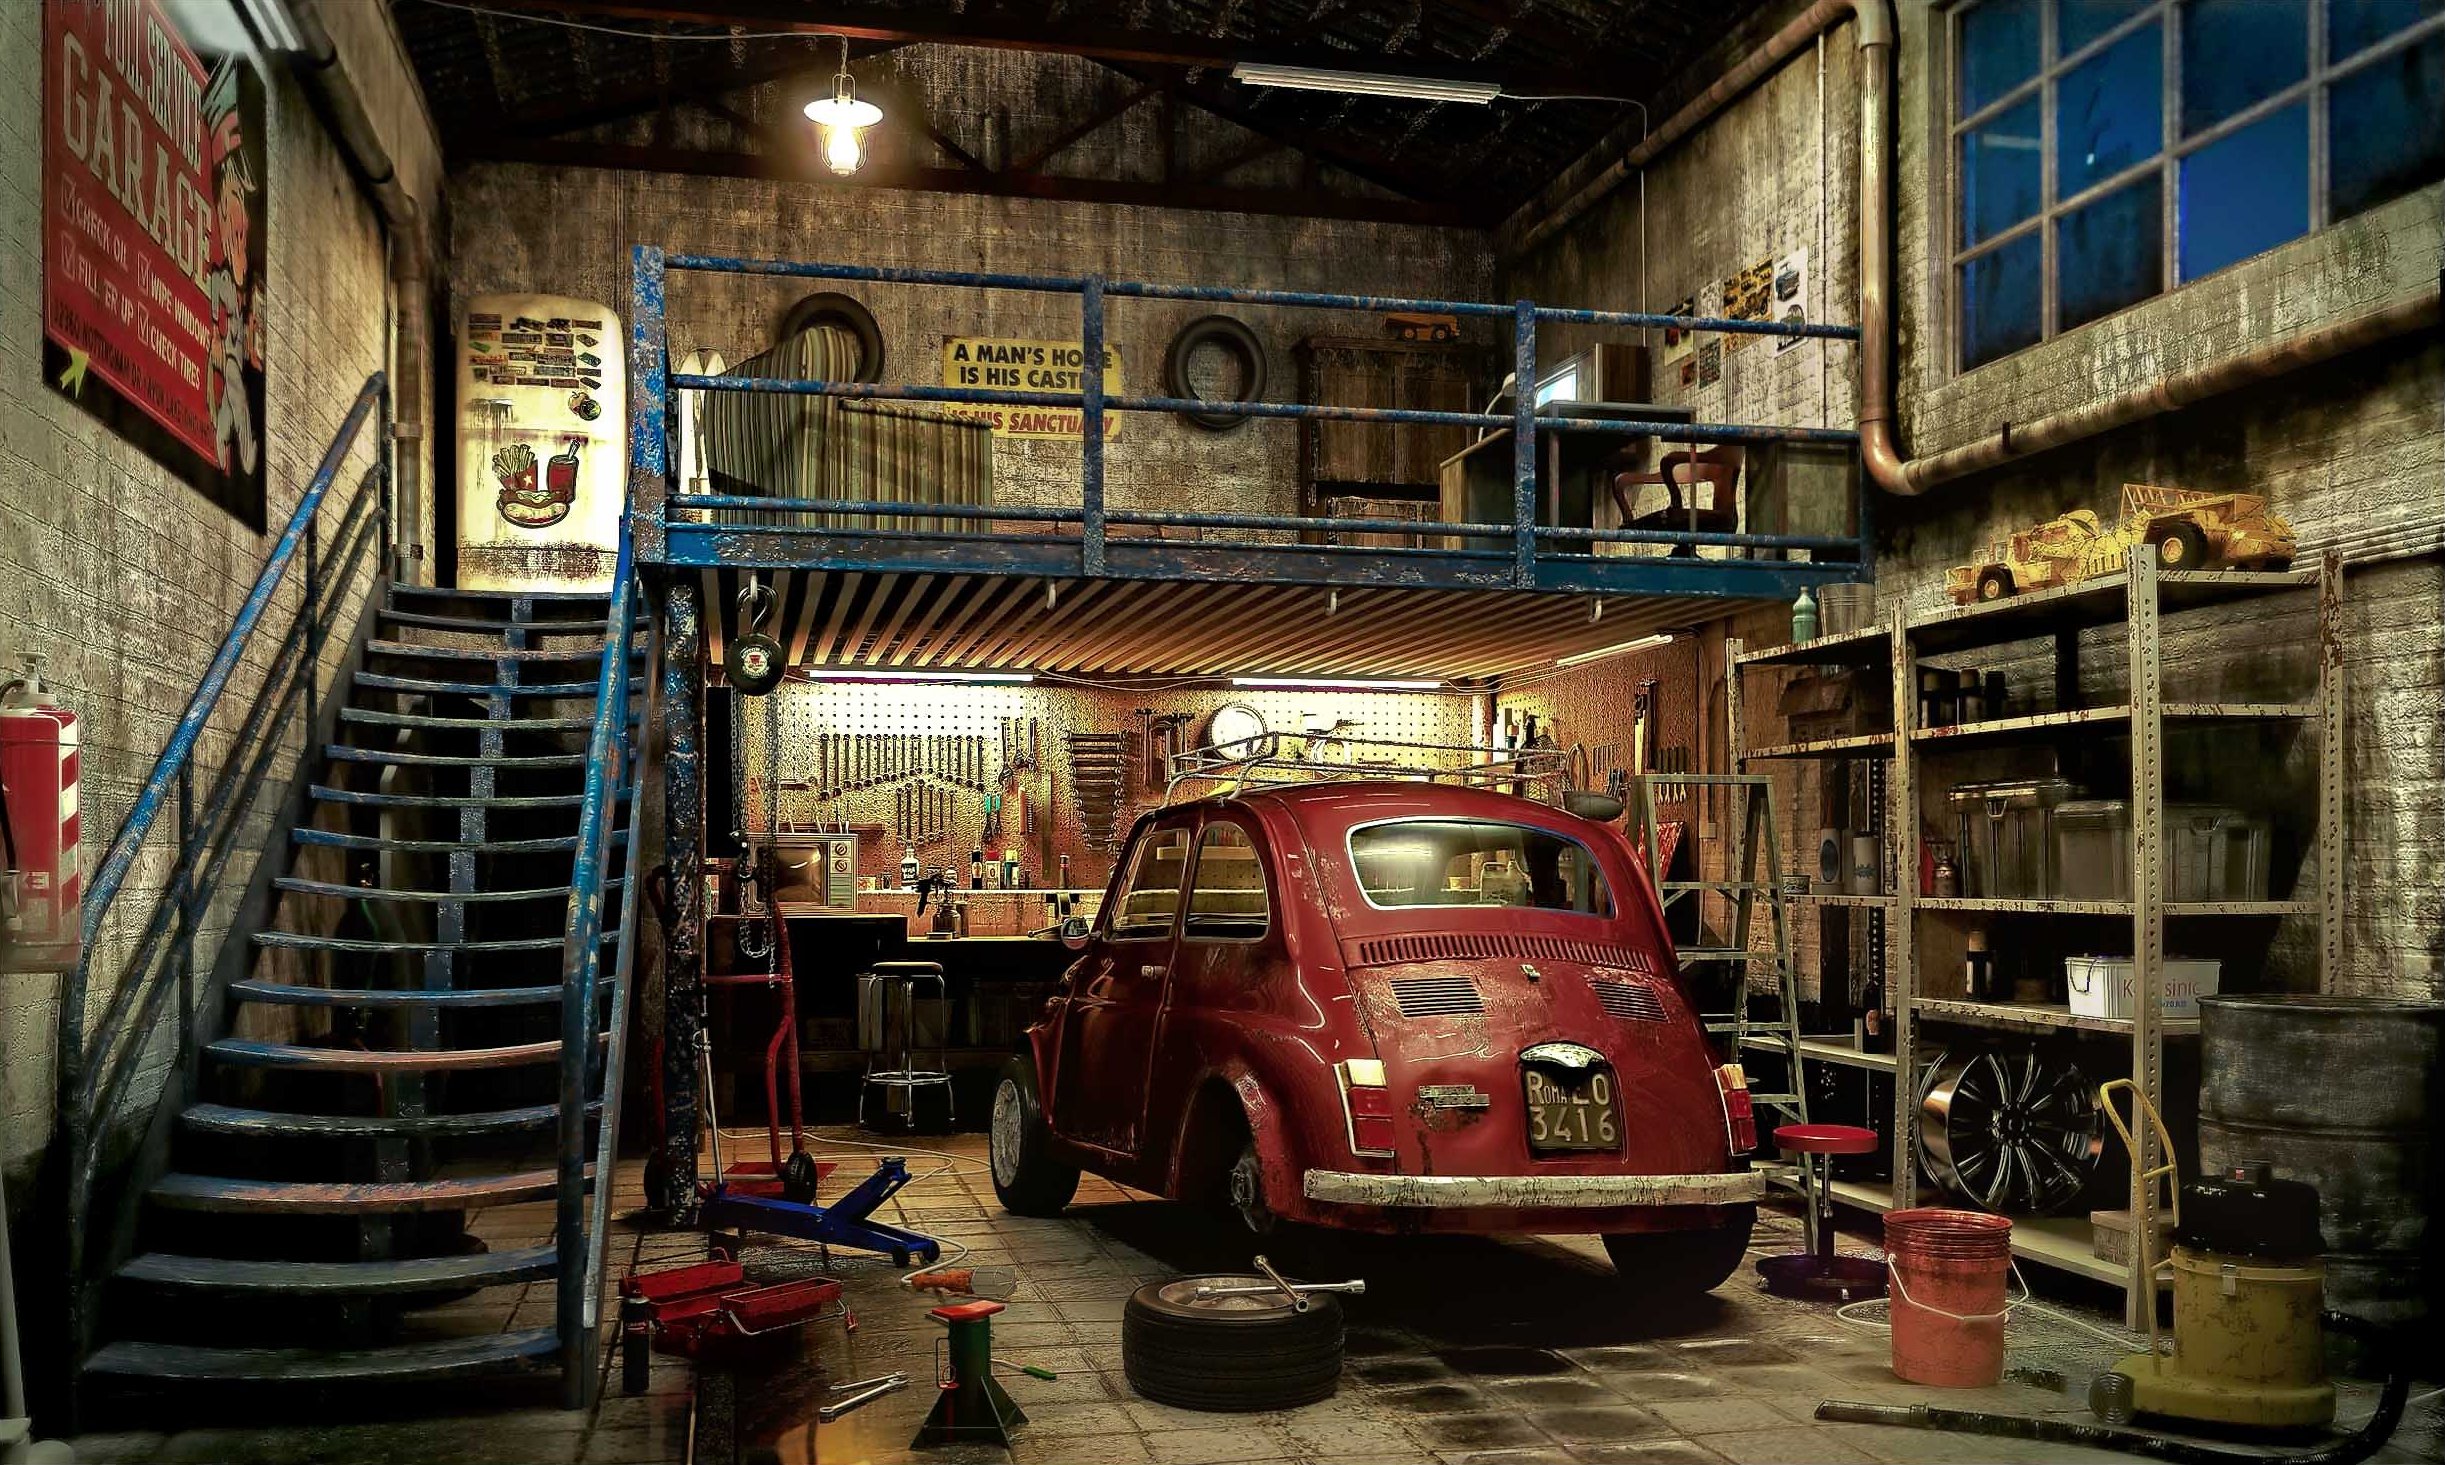 Garage | Picture of the Day